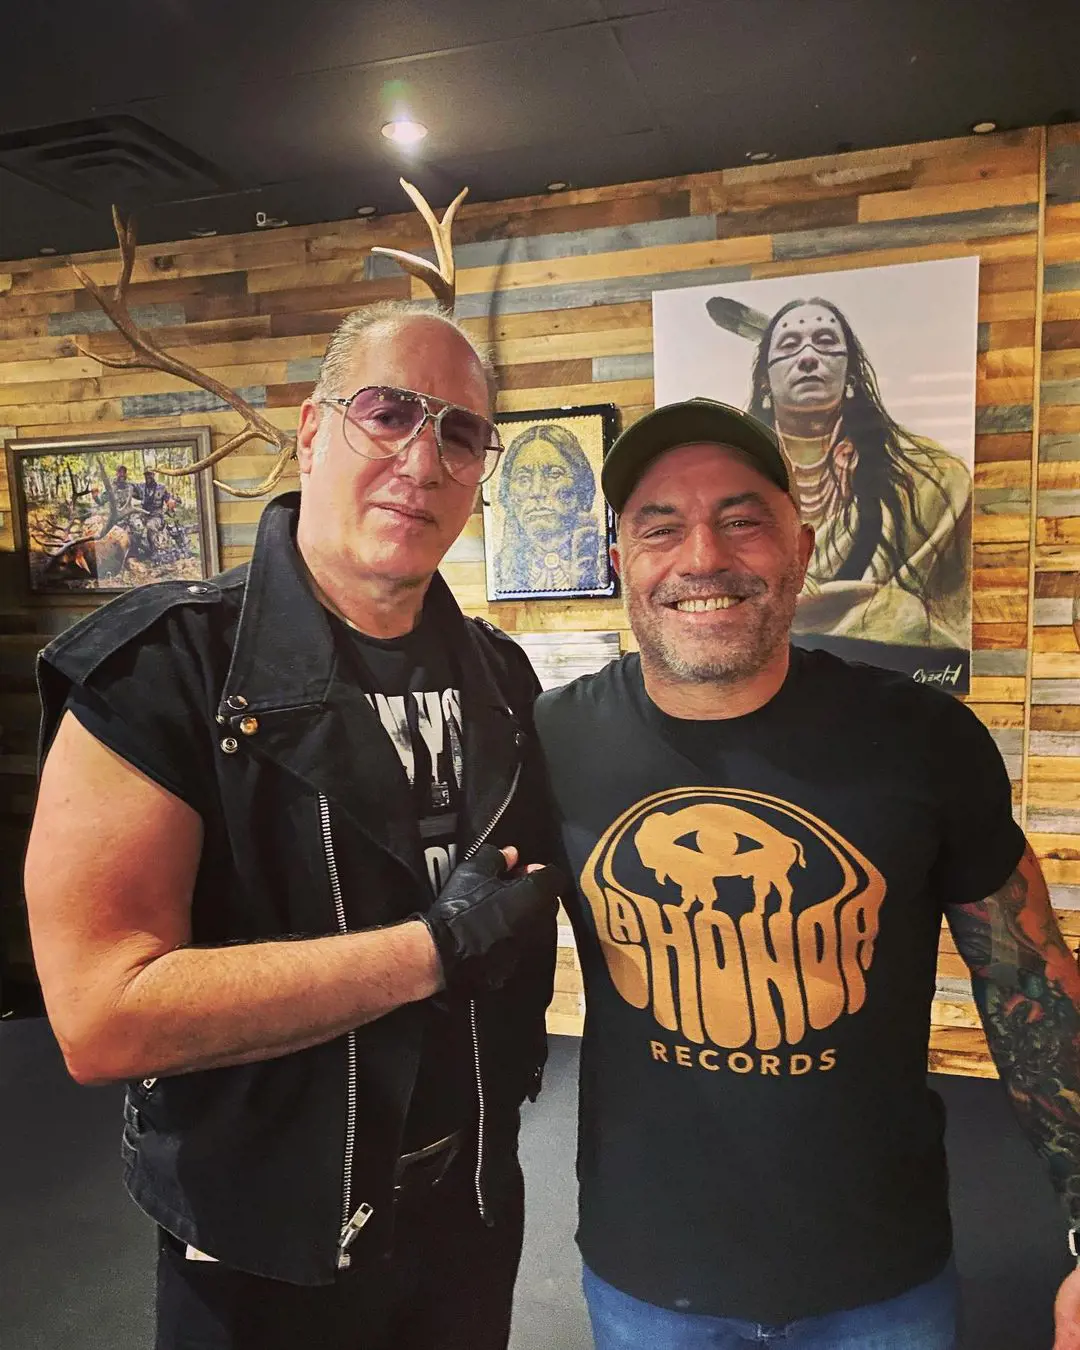 Clay and Rogan talked about their beef about 30 years ago.